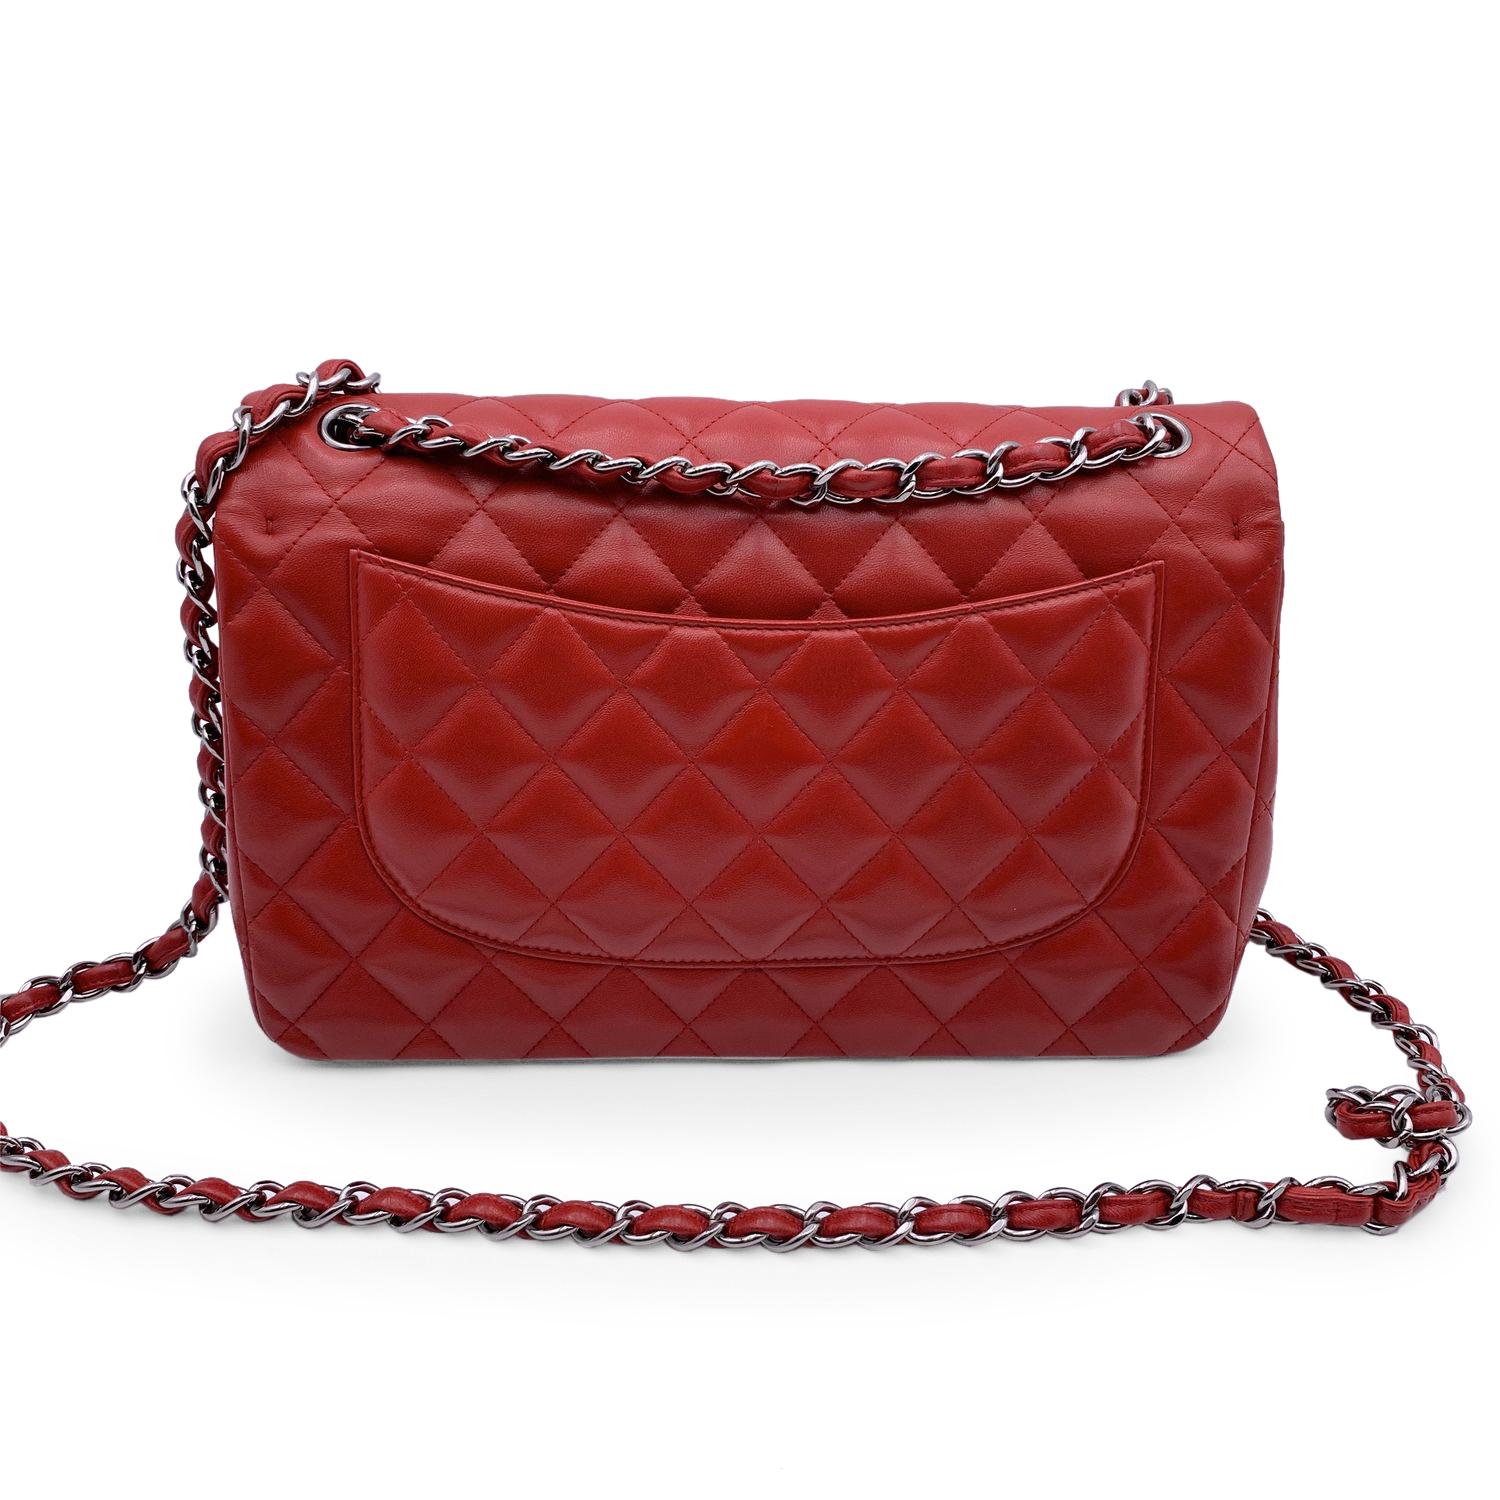 Chanel Red Quilted Jumbo Timeless Classic Shoulder Bag 30 cm For Sale 1